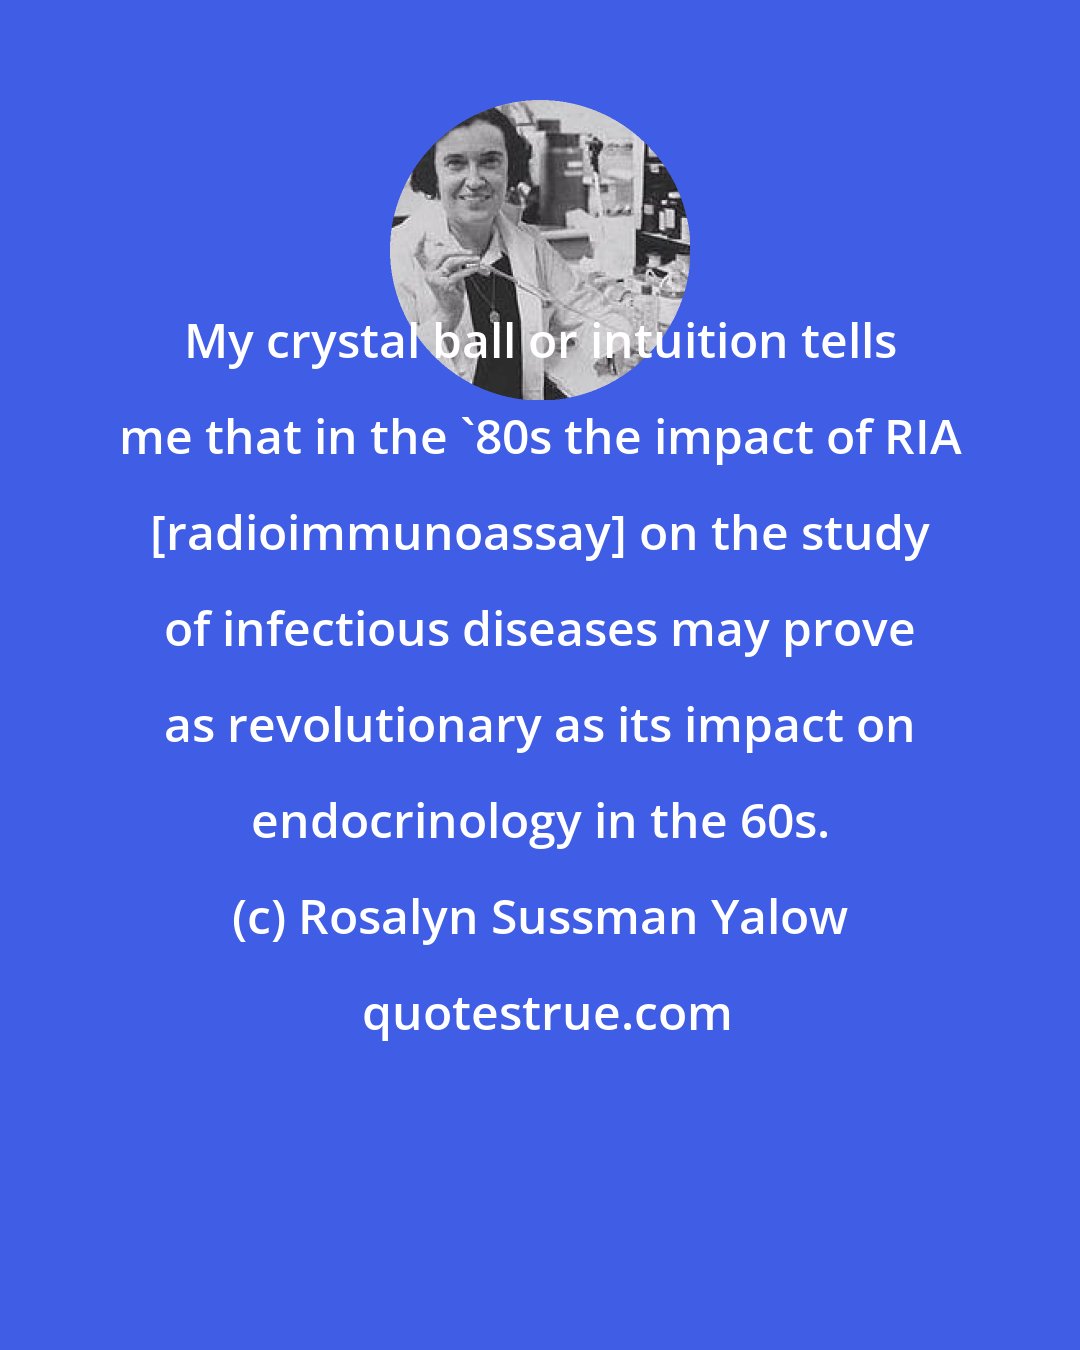 Rosalyn Sussman Yalow: My crystal ball or intuition tells me that in the '80s the impact of RIA [radioimmunoassay] on the study of infectious diseases may prove as revolutionary as its impact on endocrinology in the 60s.